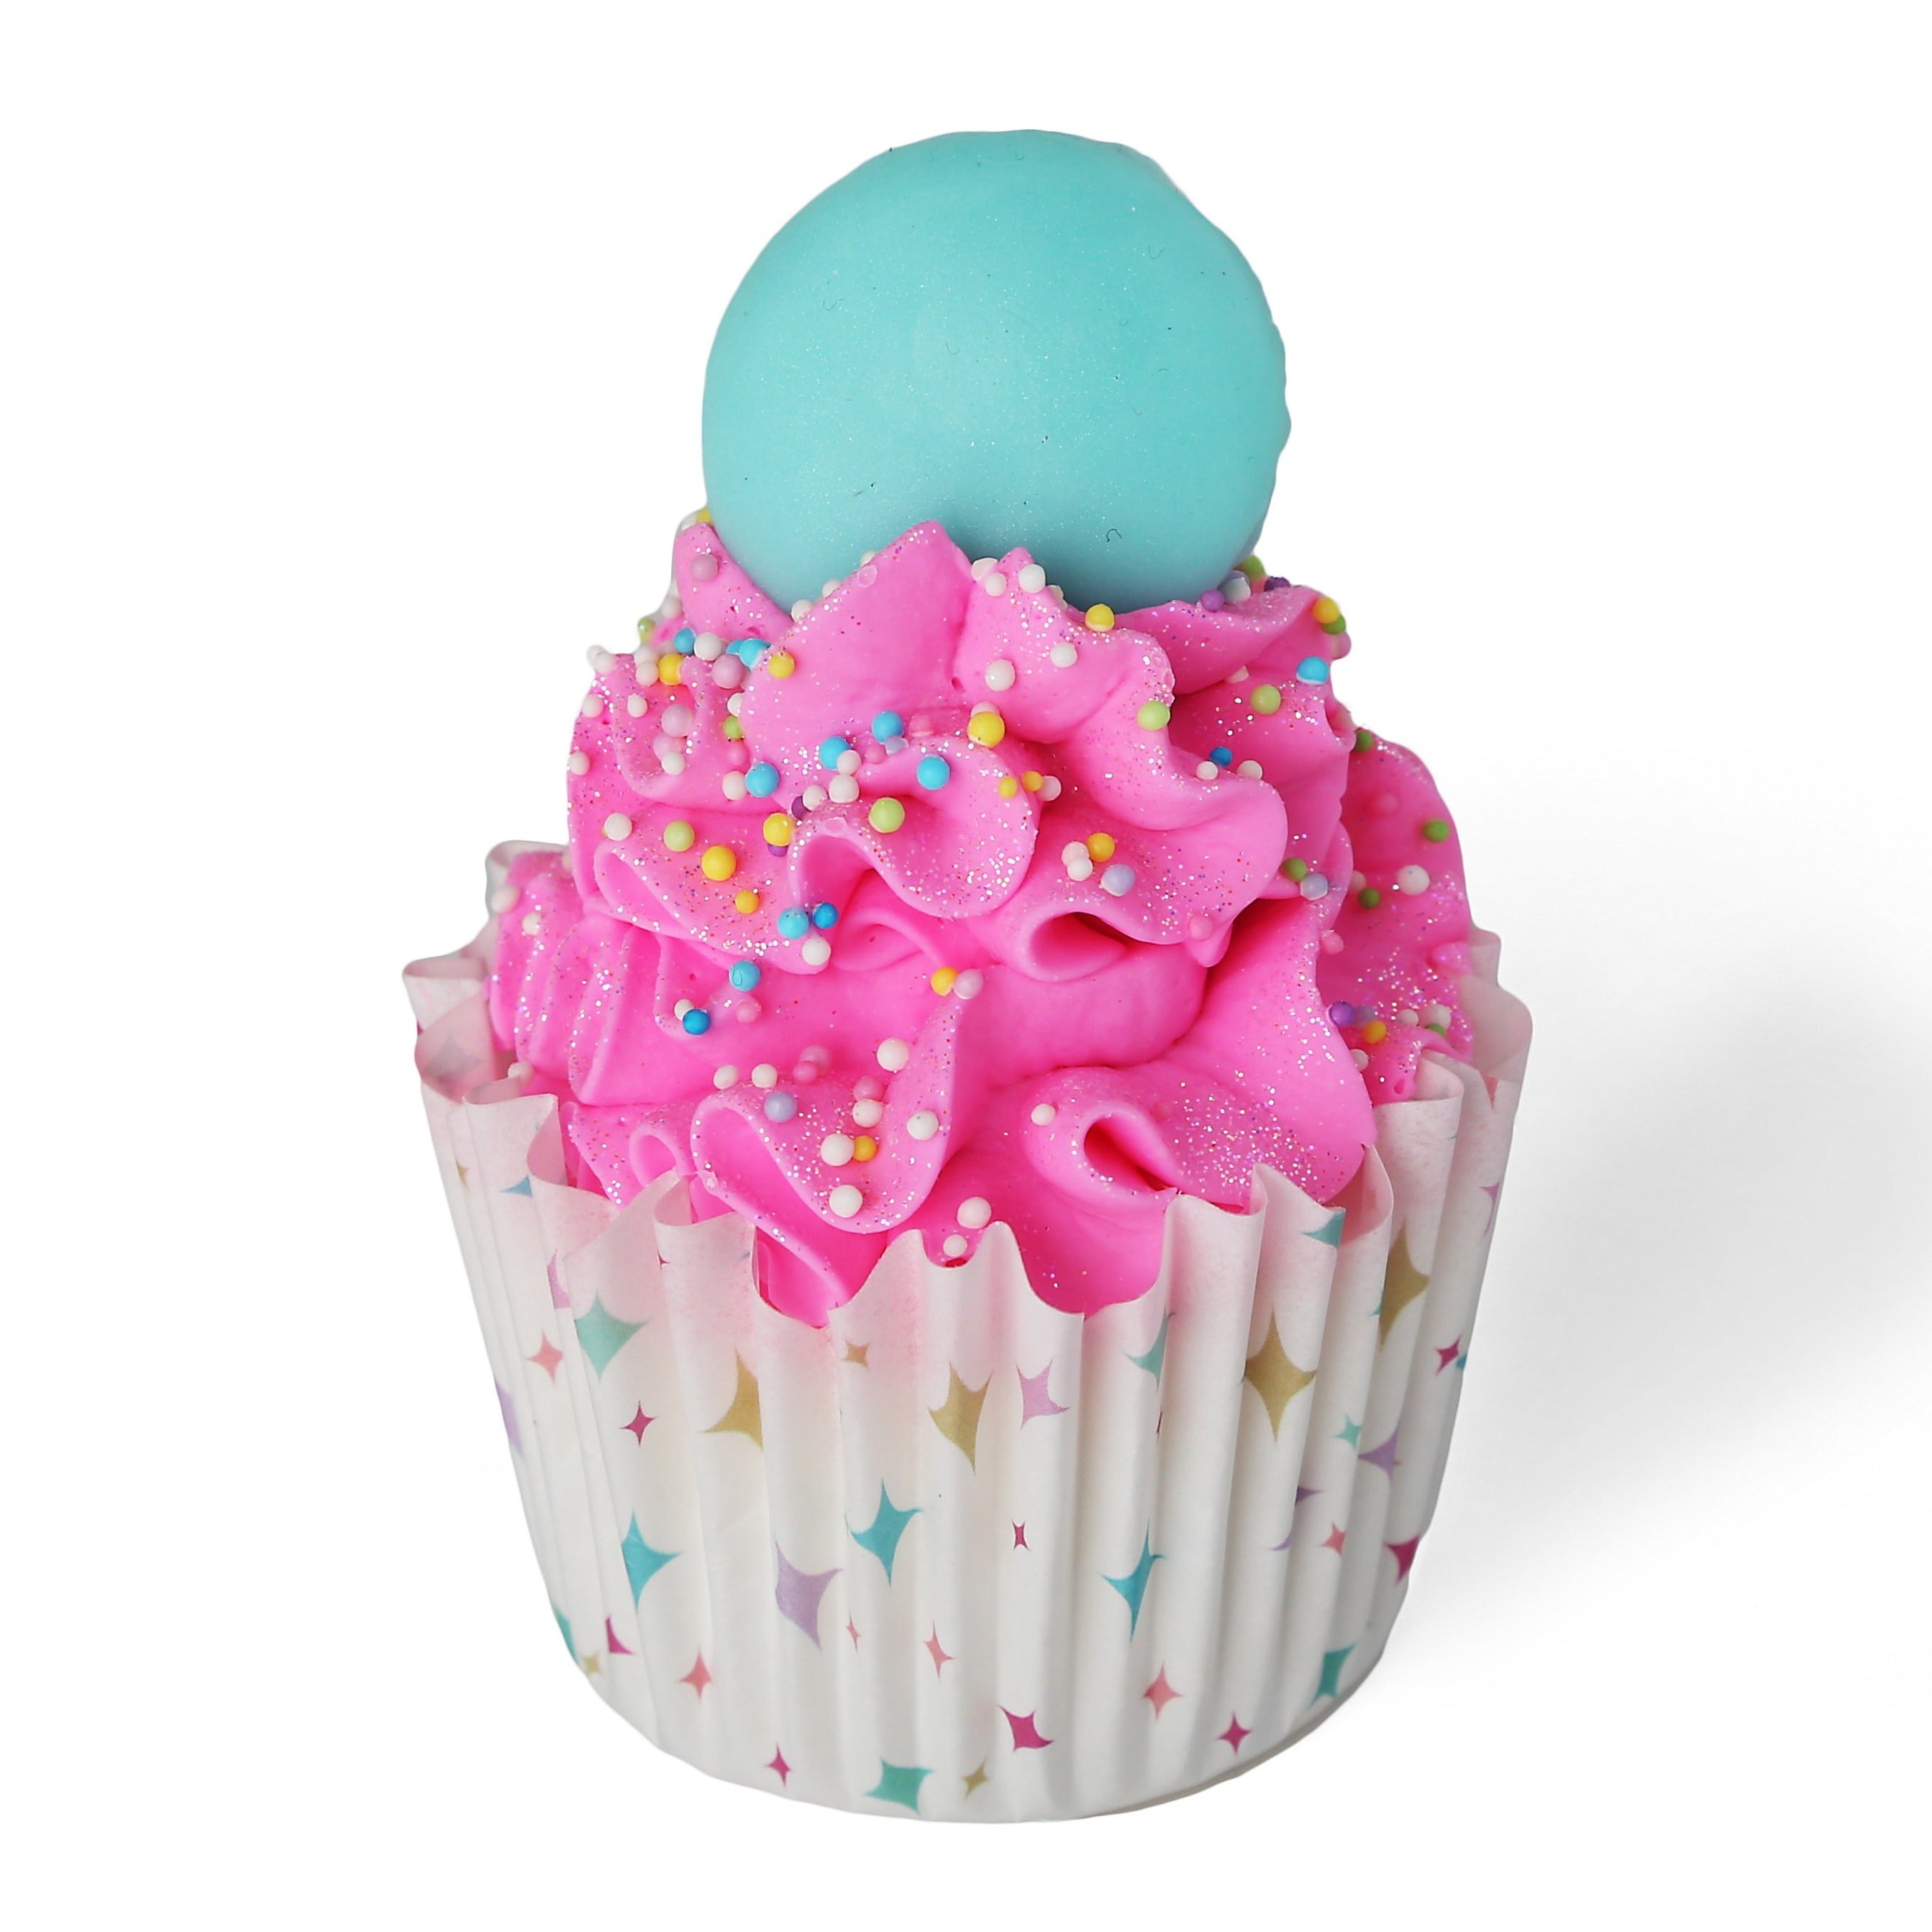 Day Dreamer Cupcake Soap. White liner with colorful pattern. Hot pink frosted soap topped with glitter and pastel sprinkles. Has a light blue macaron cookie on top.